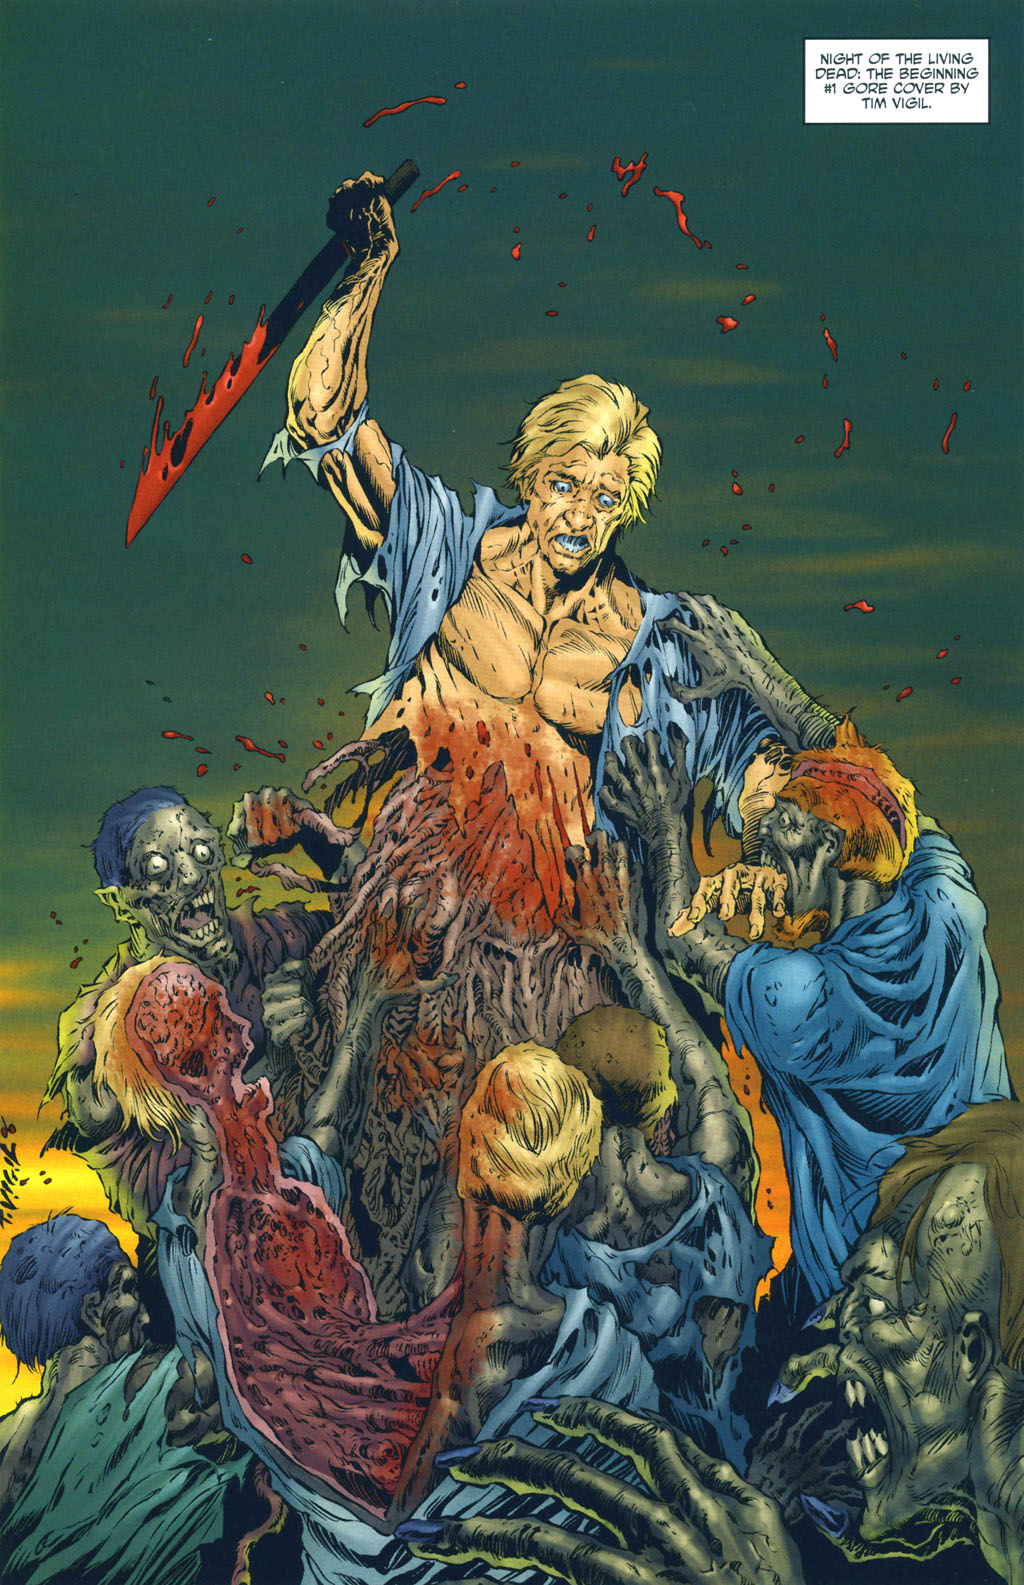 Read online Night of the Living Dead: Back from the Grave comic -  Issue # Full - 22